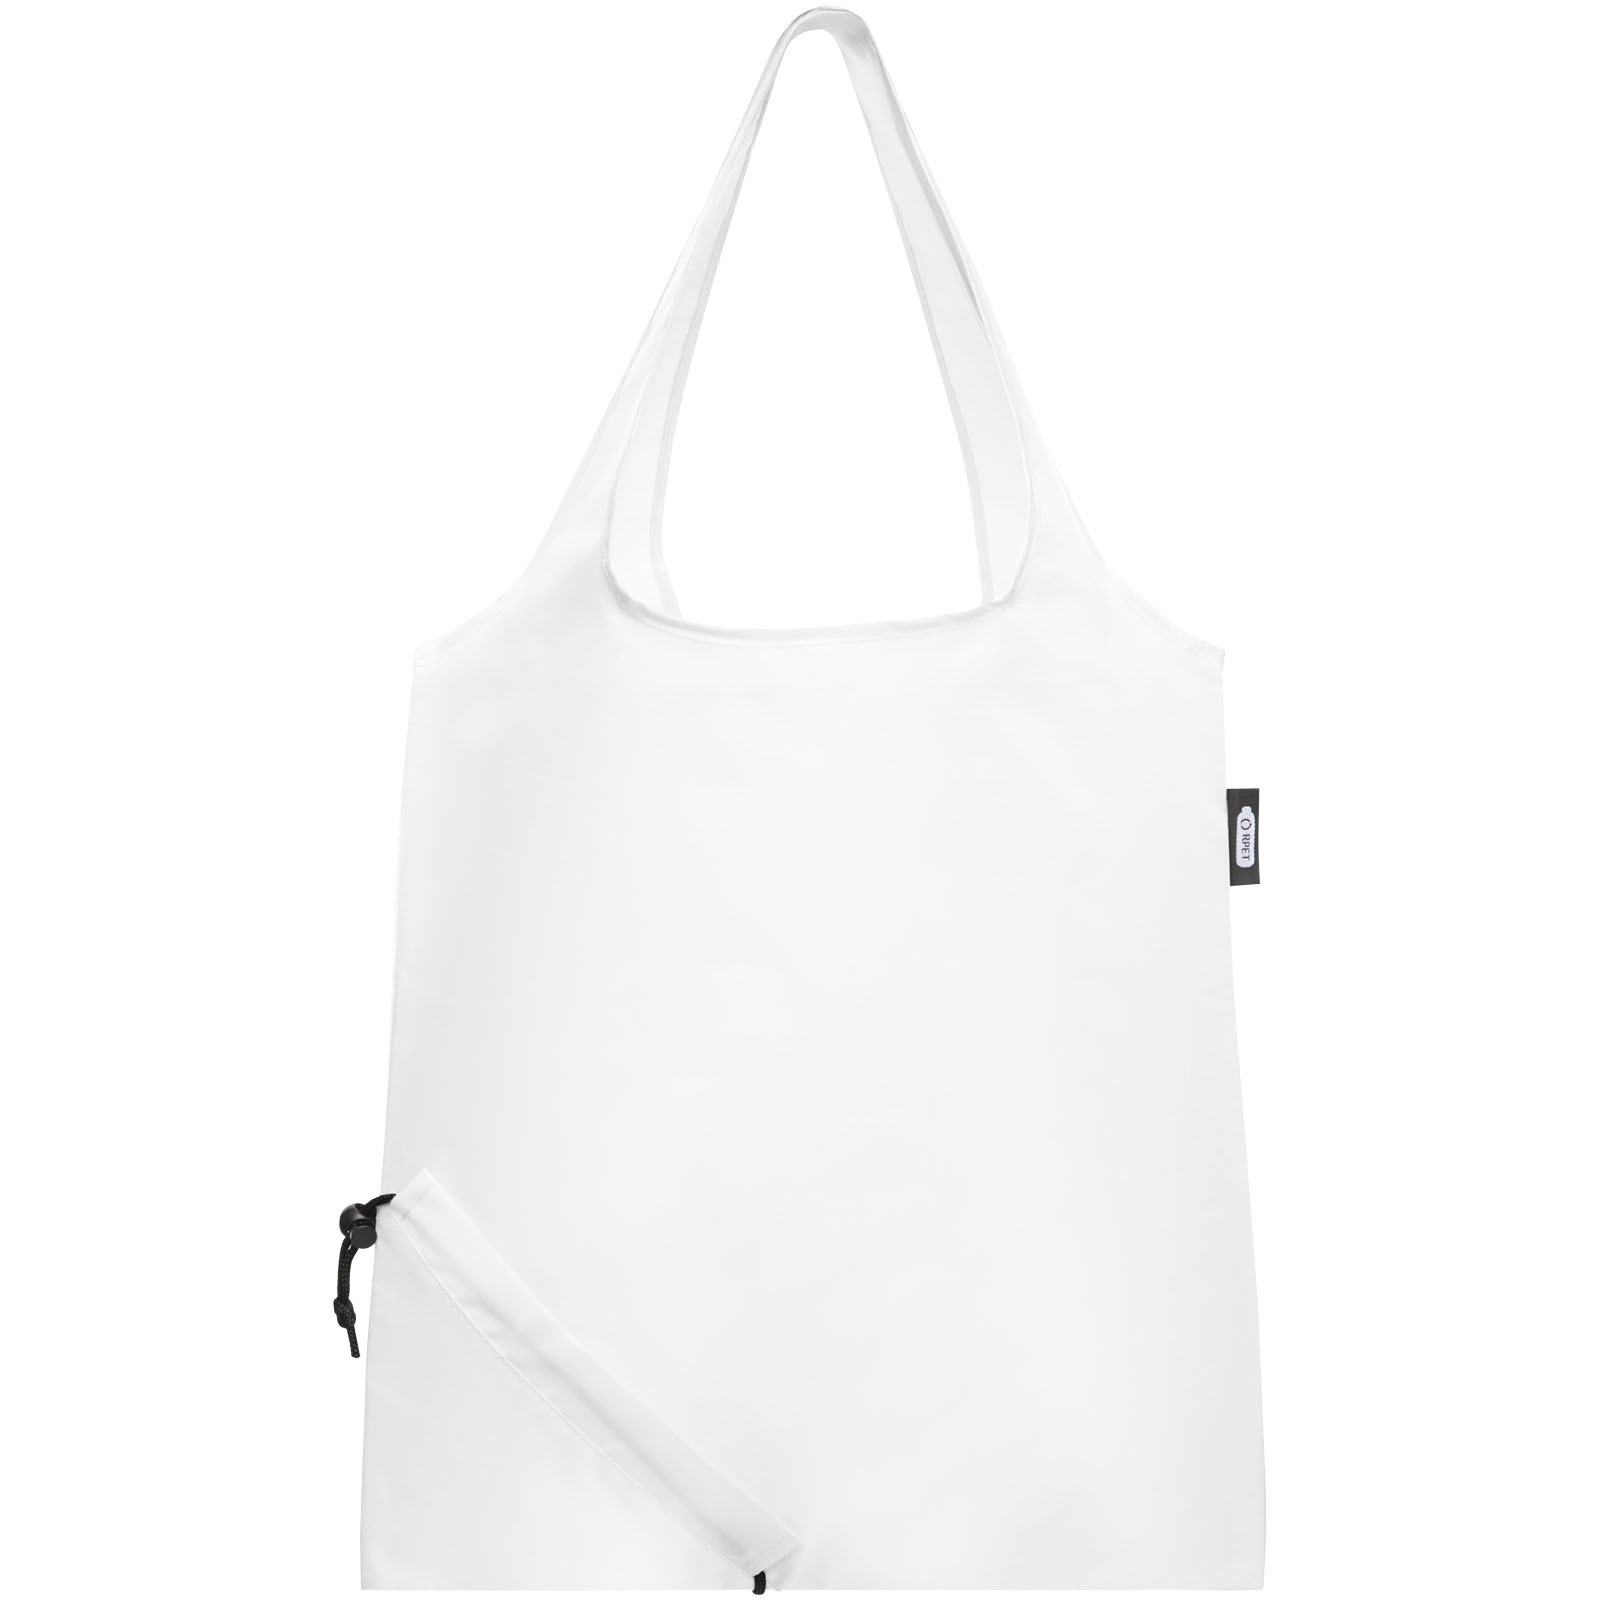 Advertising Shopping & Tote Bags - Sabia RPET foldable tote bag 7L - 1